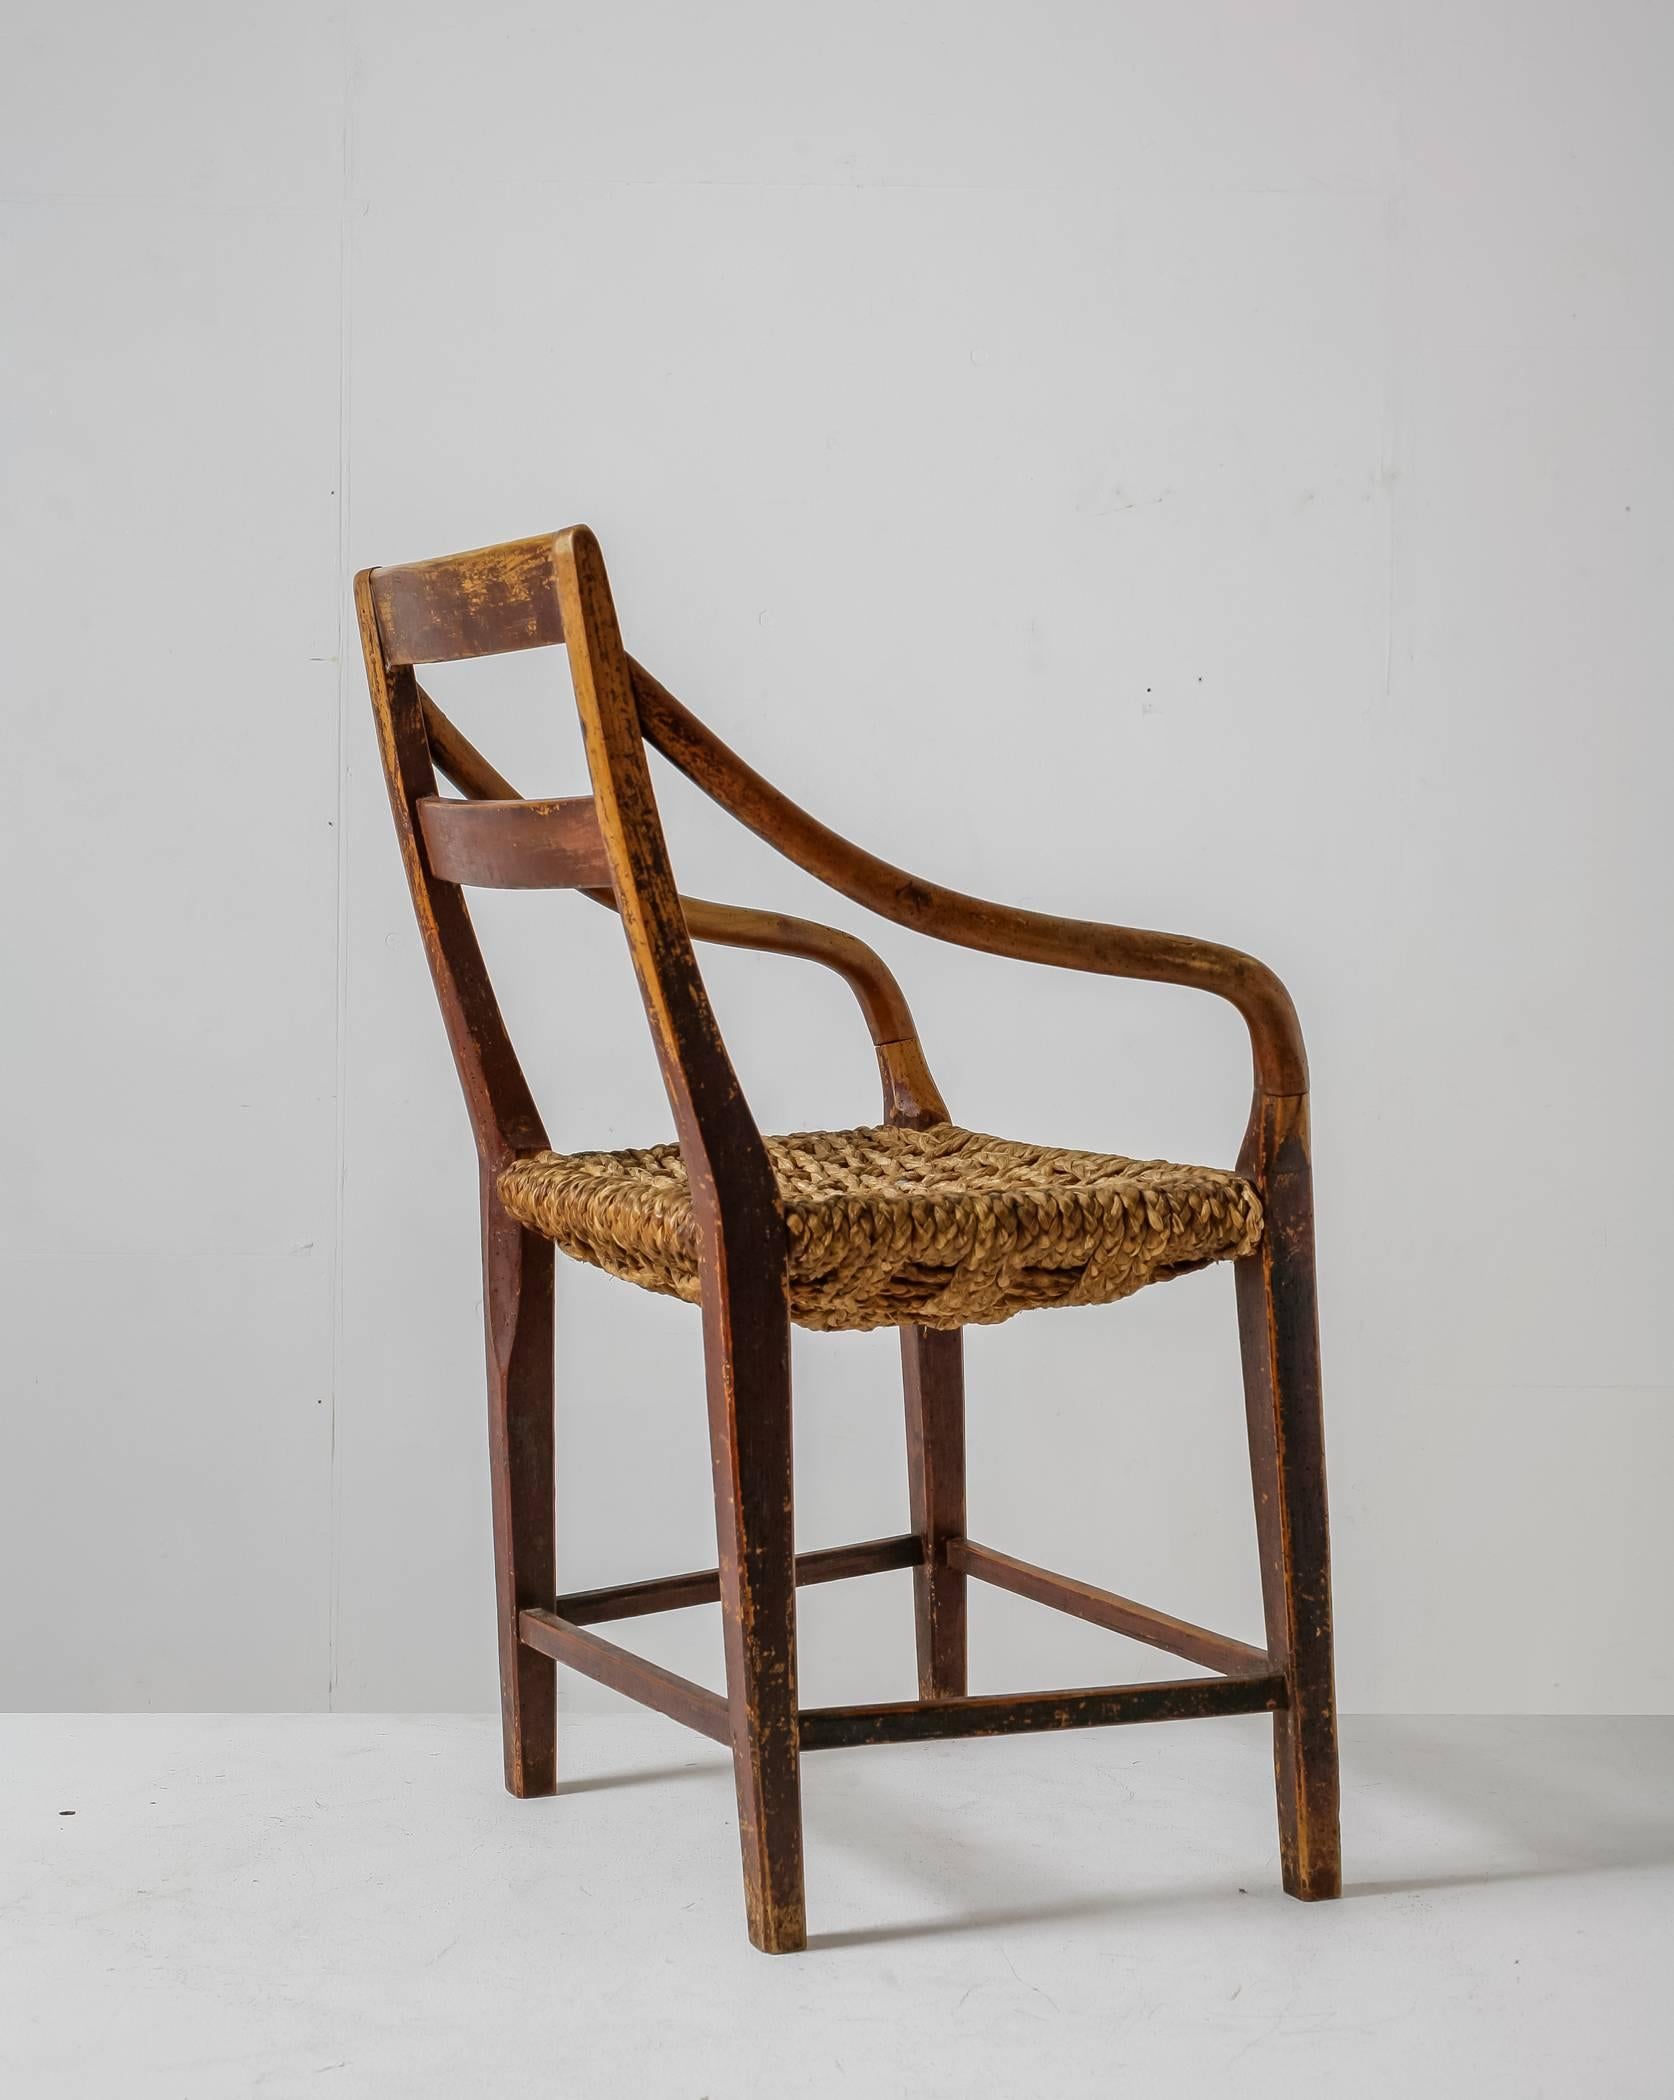 A 19th century armchair made of a stained beech frame with a seating made of thick woven raffia rope. The combination of the rugged seating and the thin and elegant curved armrests makes this a very interesting and unique object chair.

